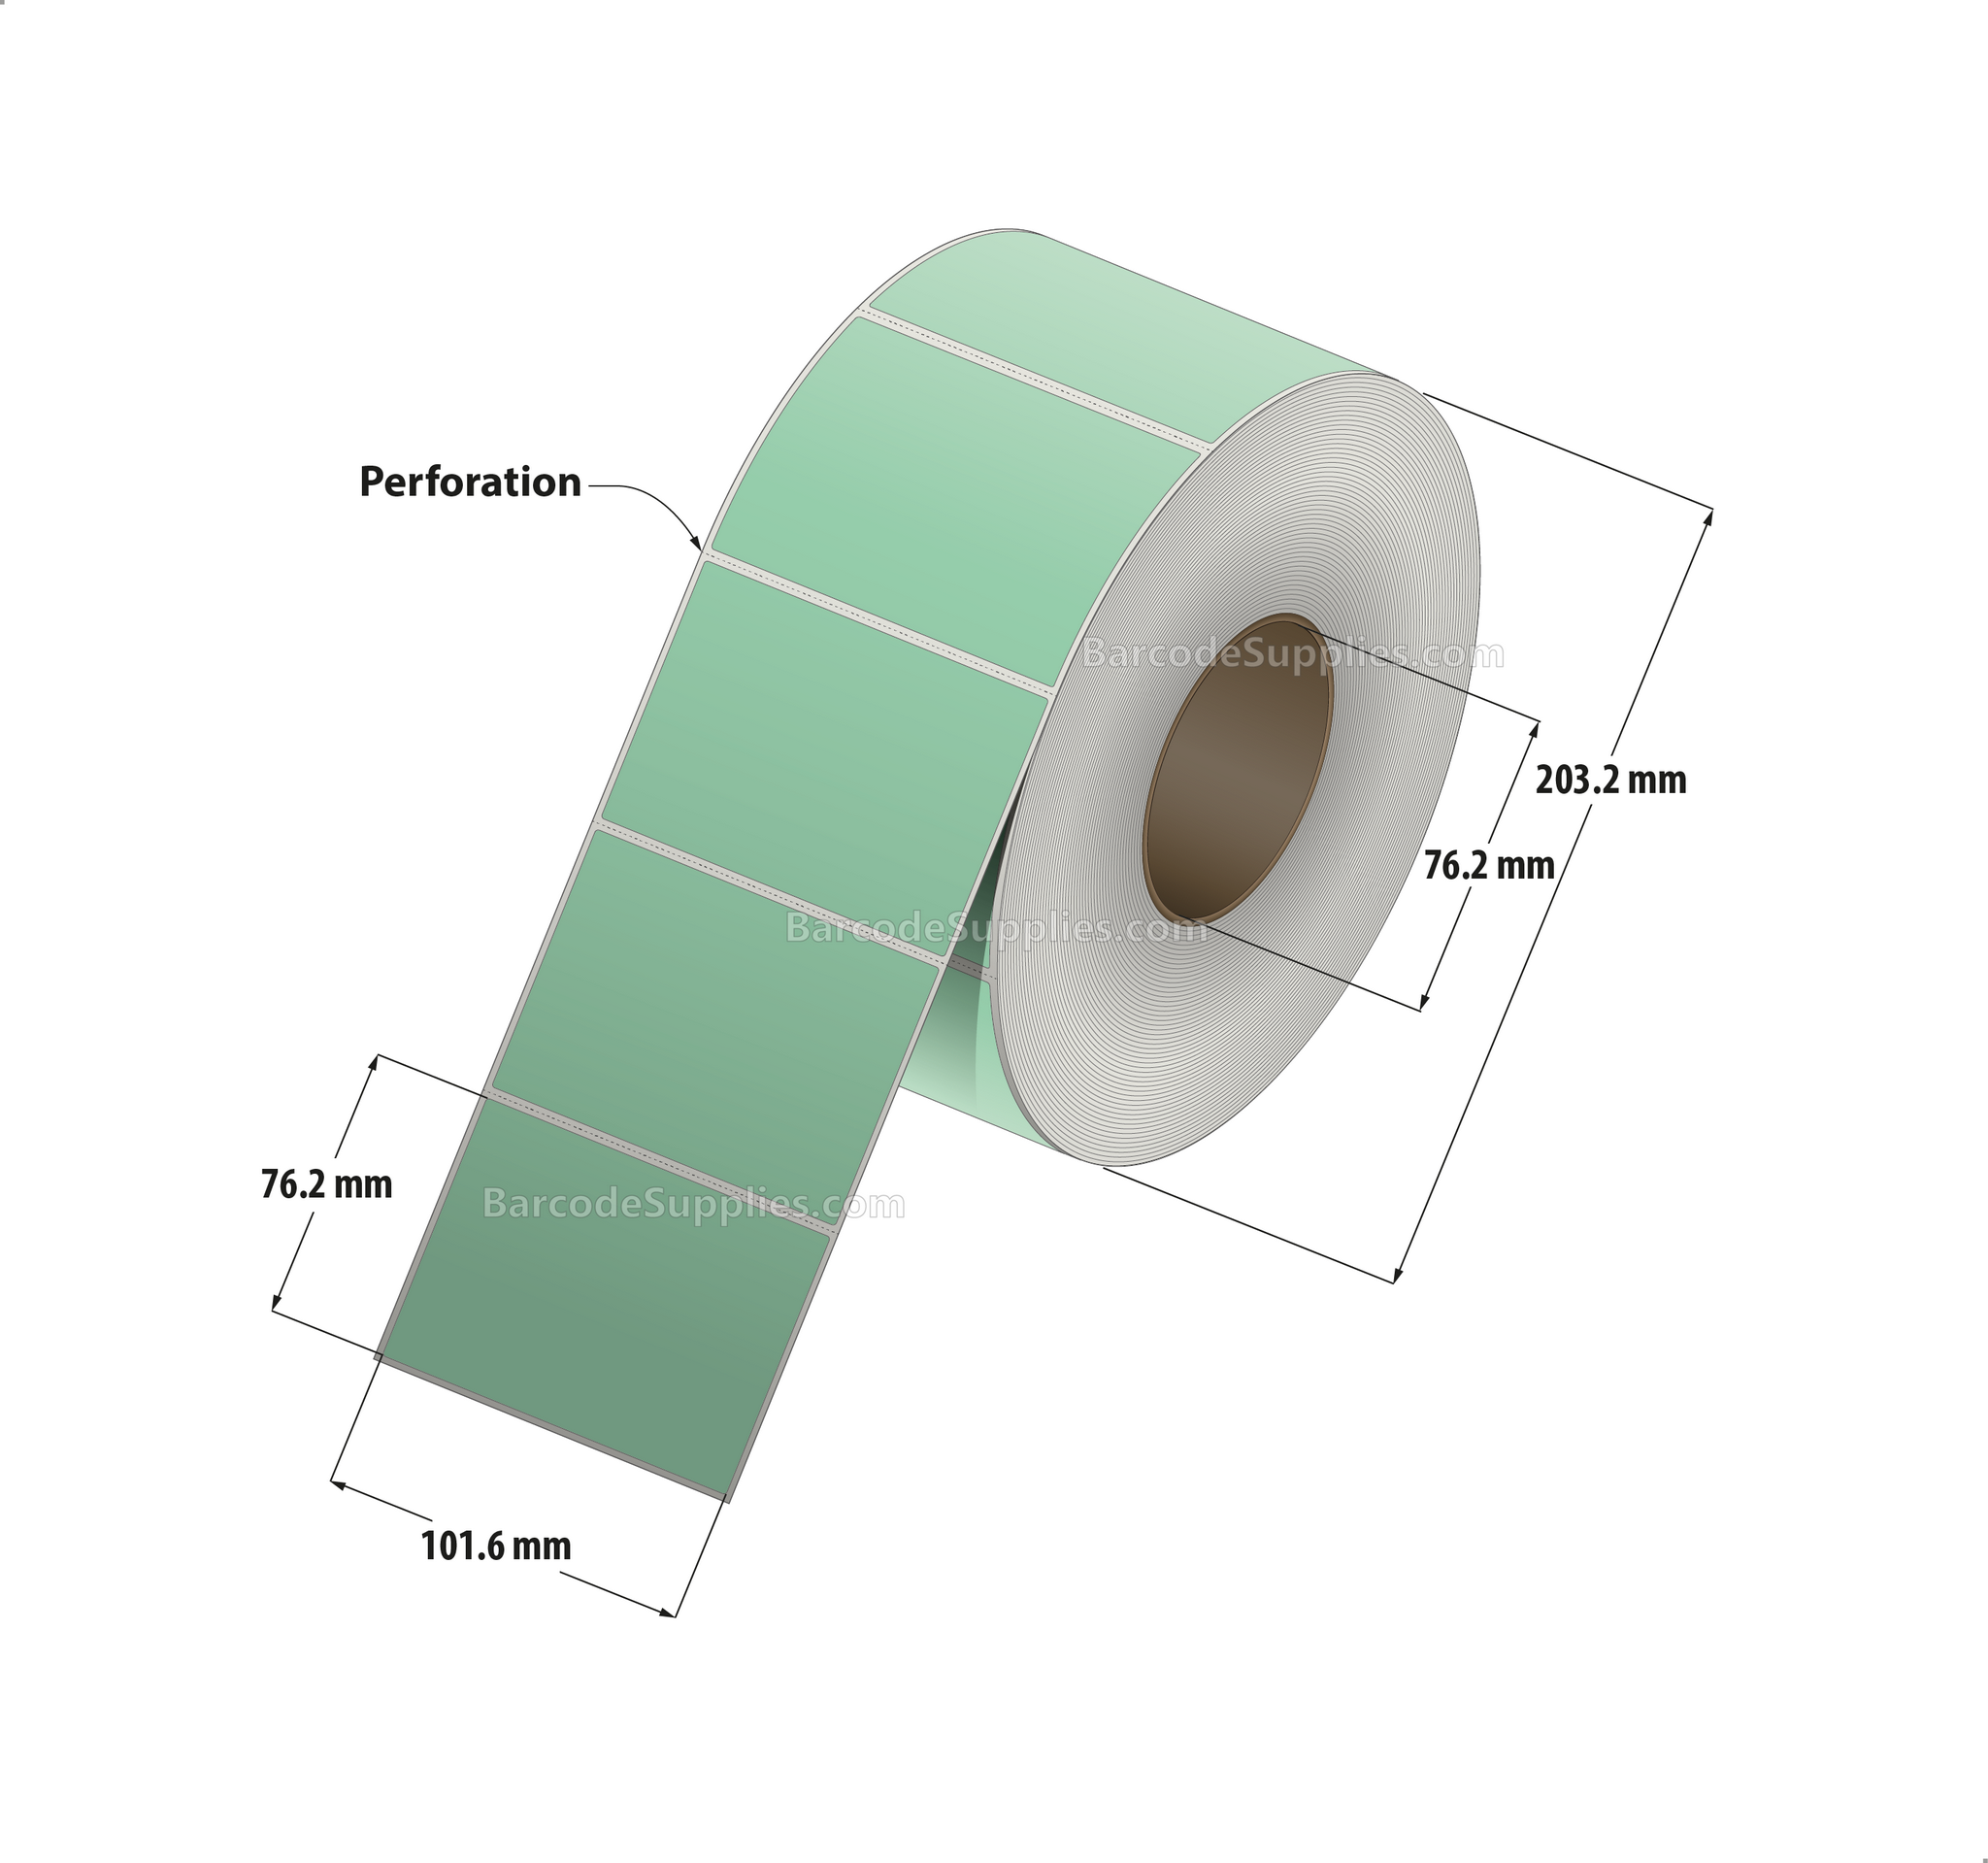 4 x 3 Thermal Transfer 345 Green Labels With Permanent Adhesive - Perforated - 1900 Labels Per Roll - Carton Of 4 Rolls - 7600 Labels Total - MPN: RFC-4-3-1900-GR - BarcodeSource, Inc.